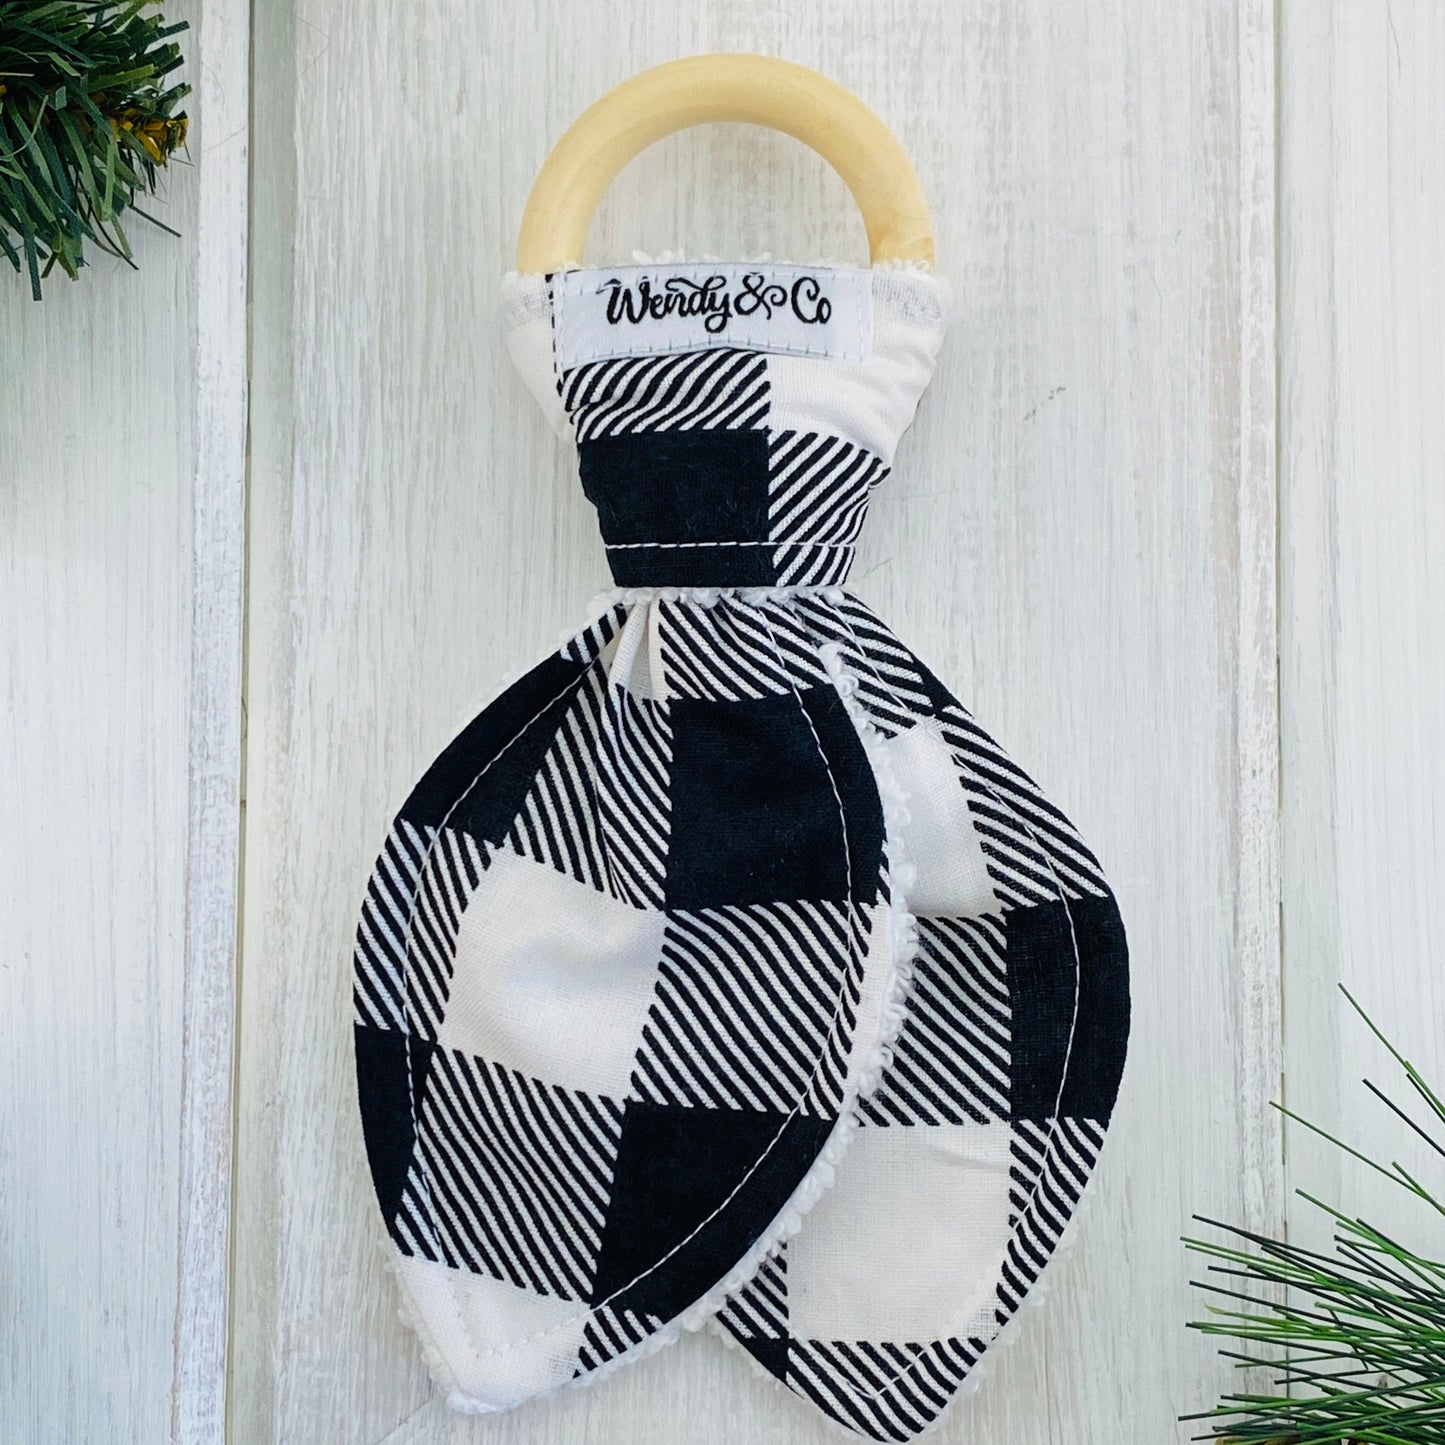 Handmade bunny ear teether, natural wood and fabric shown in black and white buffalo check.